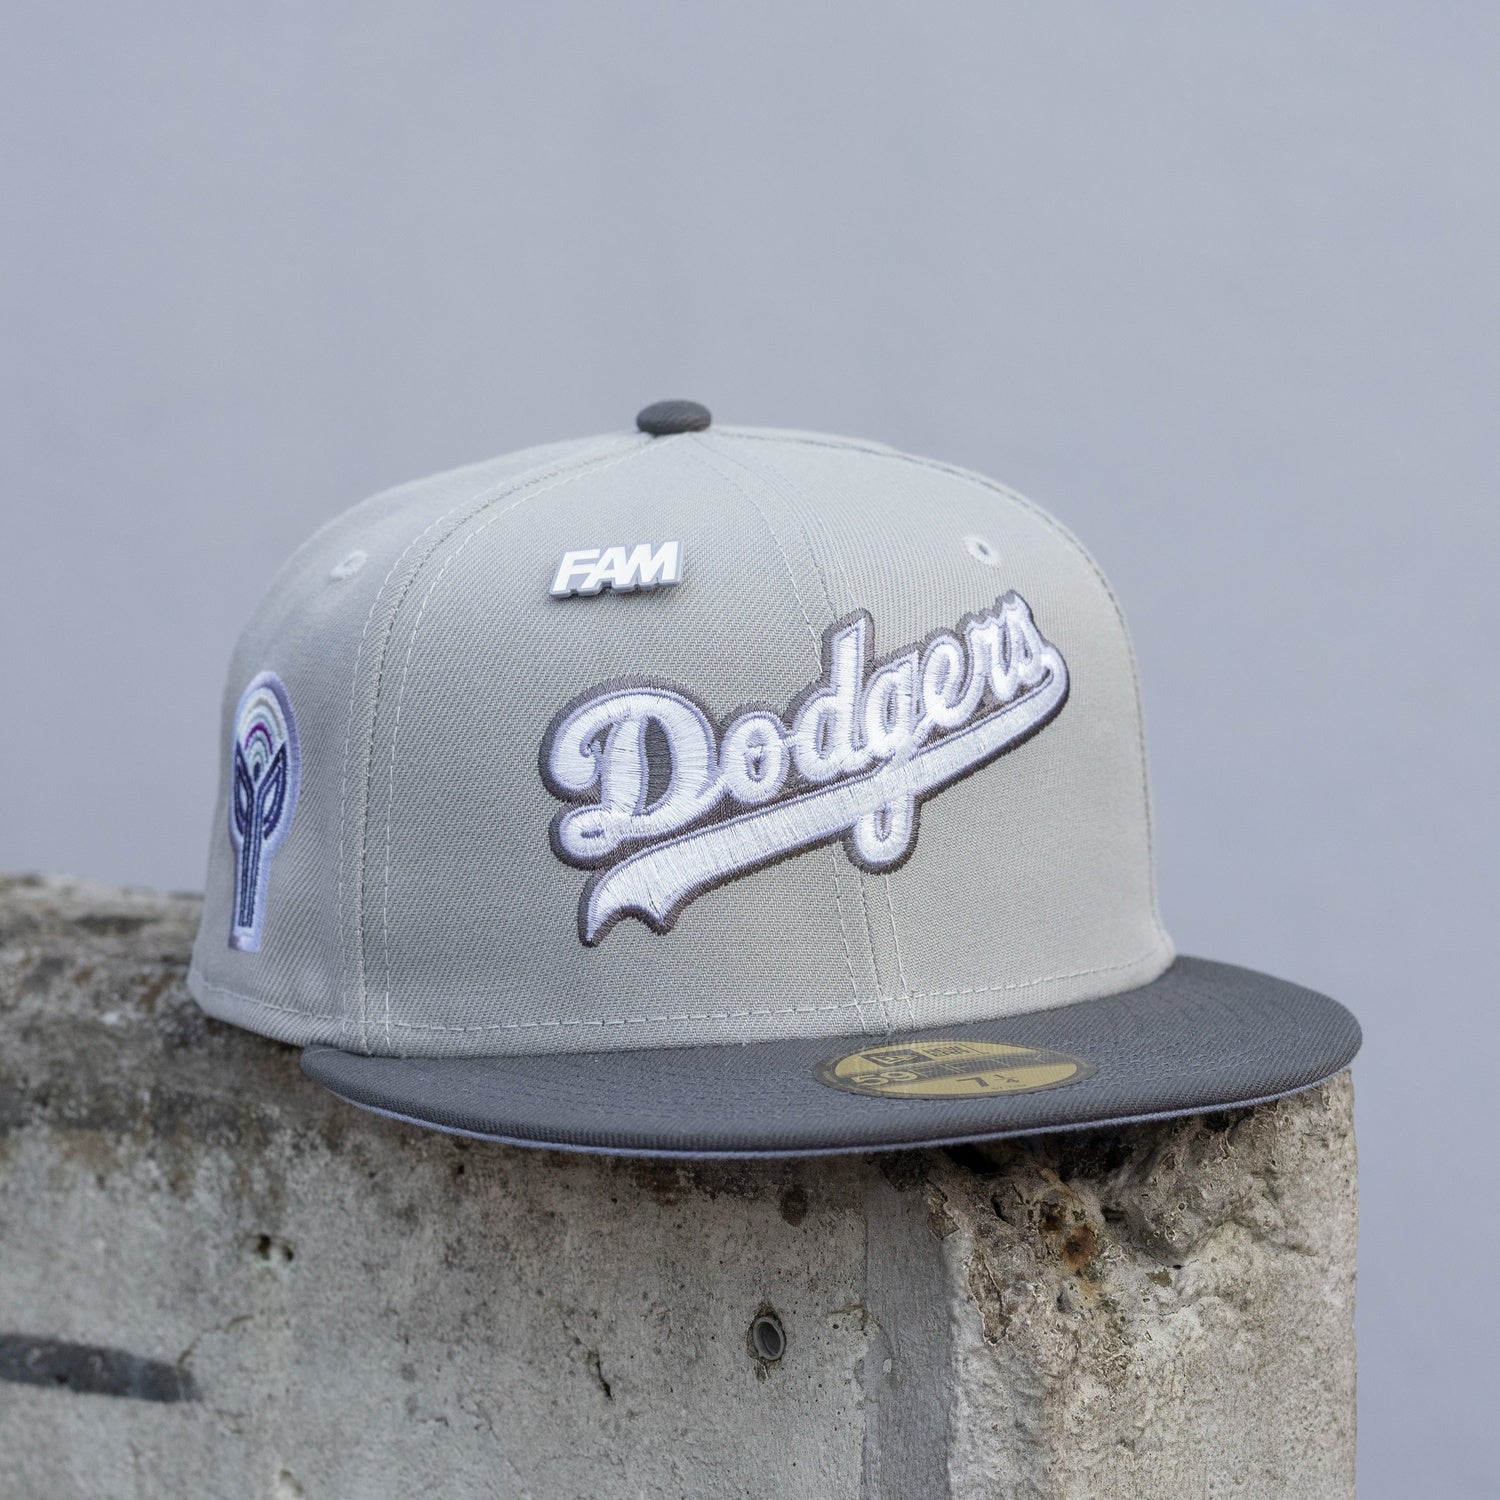 Los Angeles Dodgers 2-Tone Color Pack 59FIFTY Fitted Hat - Light Blue/ Charcoal BLFSTC / 7 7/8